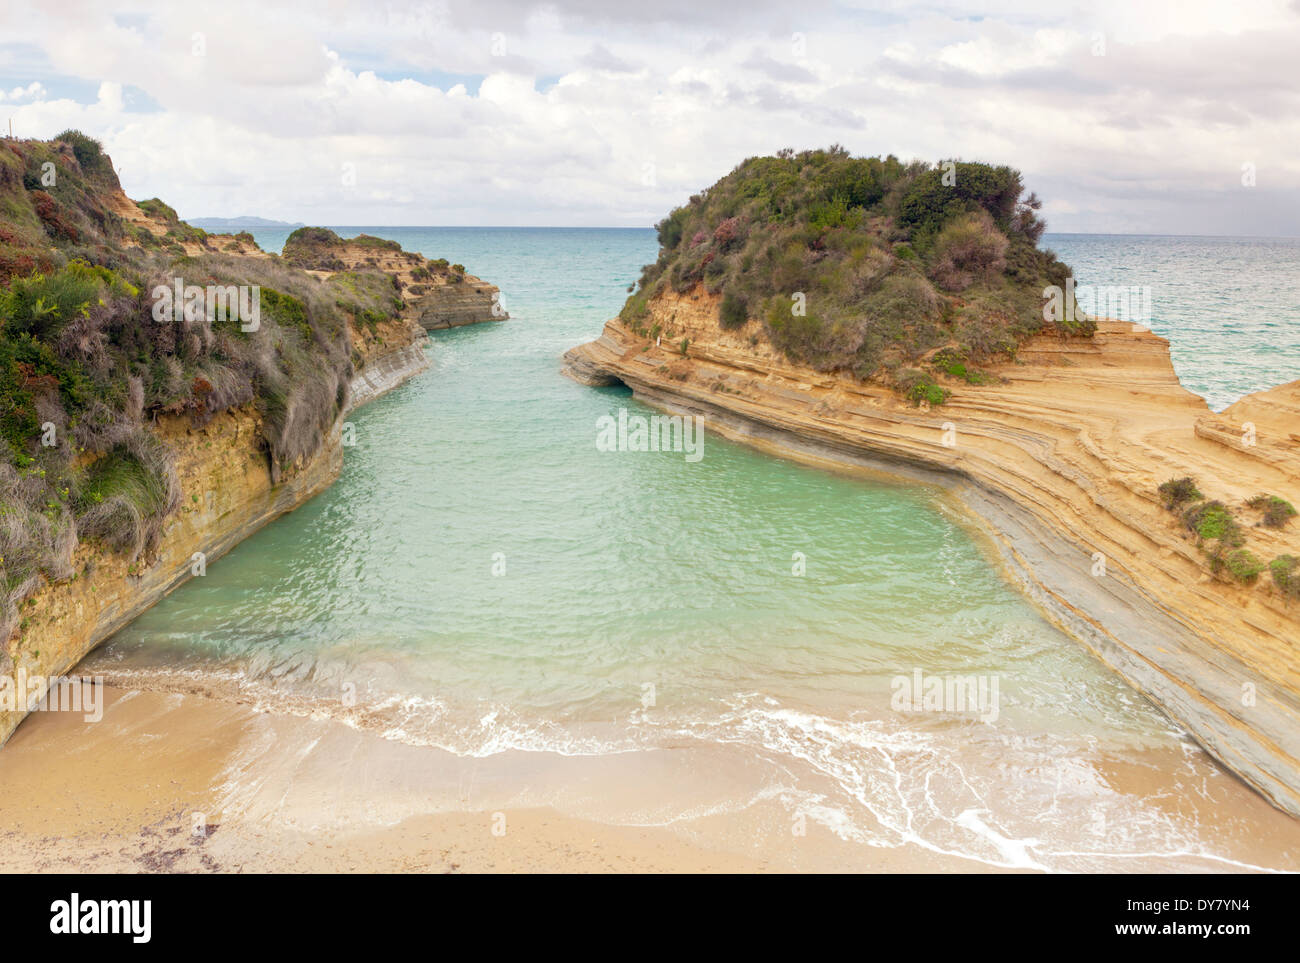 The 'Canal d'Amour' in Sideri, on the north coast of Corfu, Greece Stock Photo